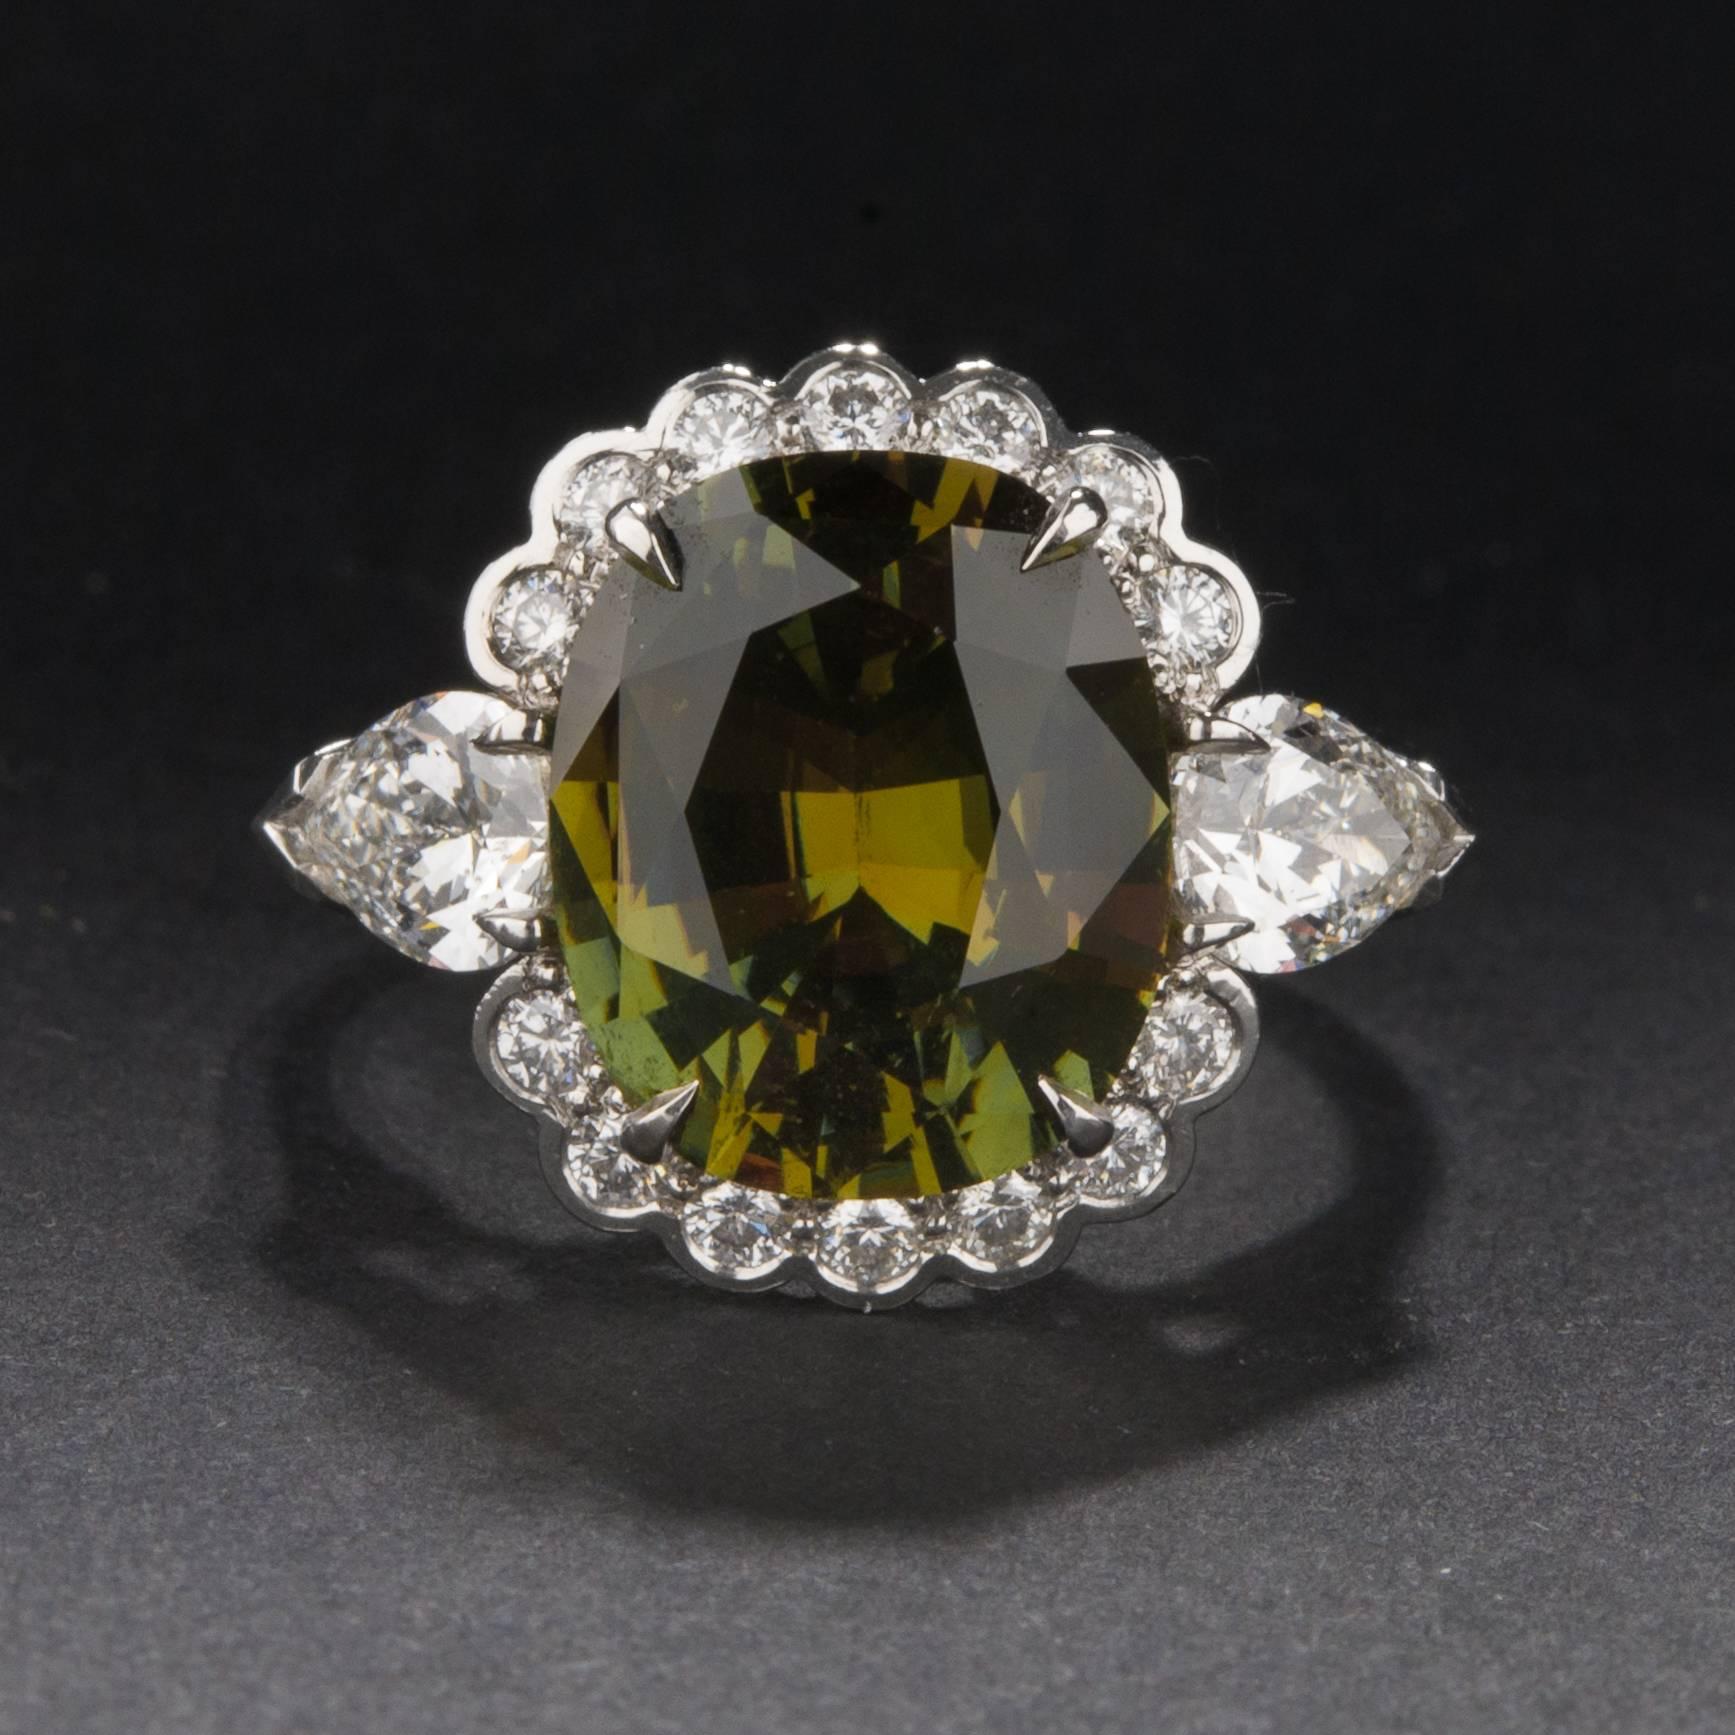 This gorgeous ring features a 5.10 carat GIA certified alexandrite with excellent color change. The extraordinary center stone is flanked by two pear cut diamonds weighing 1.00 carats total, as well as an additional .28 total carats of accent